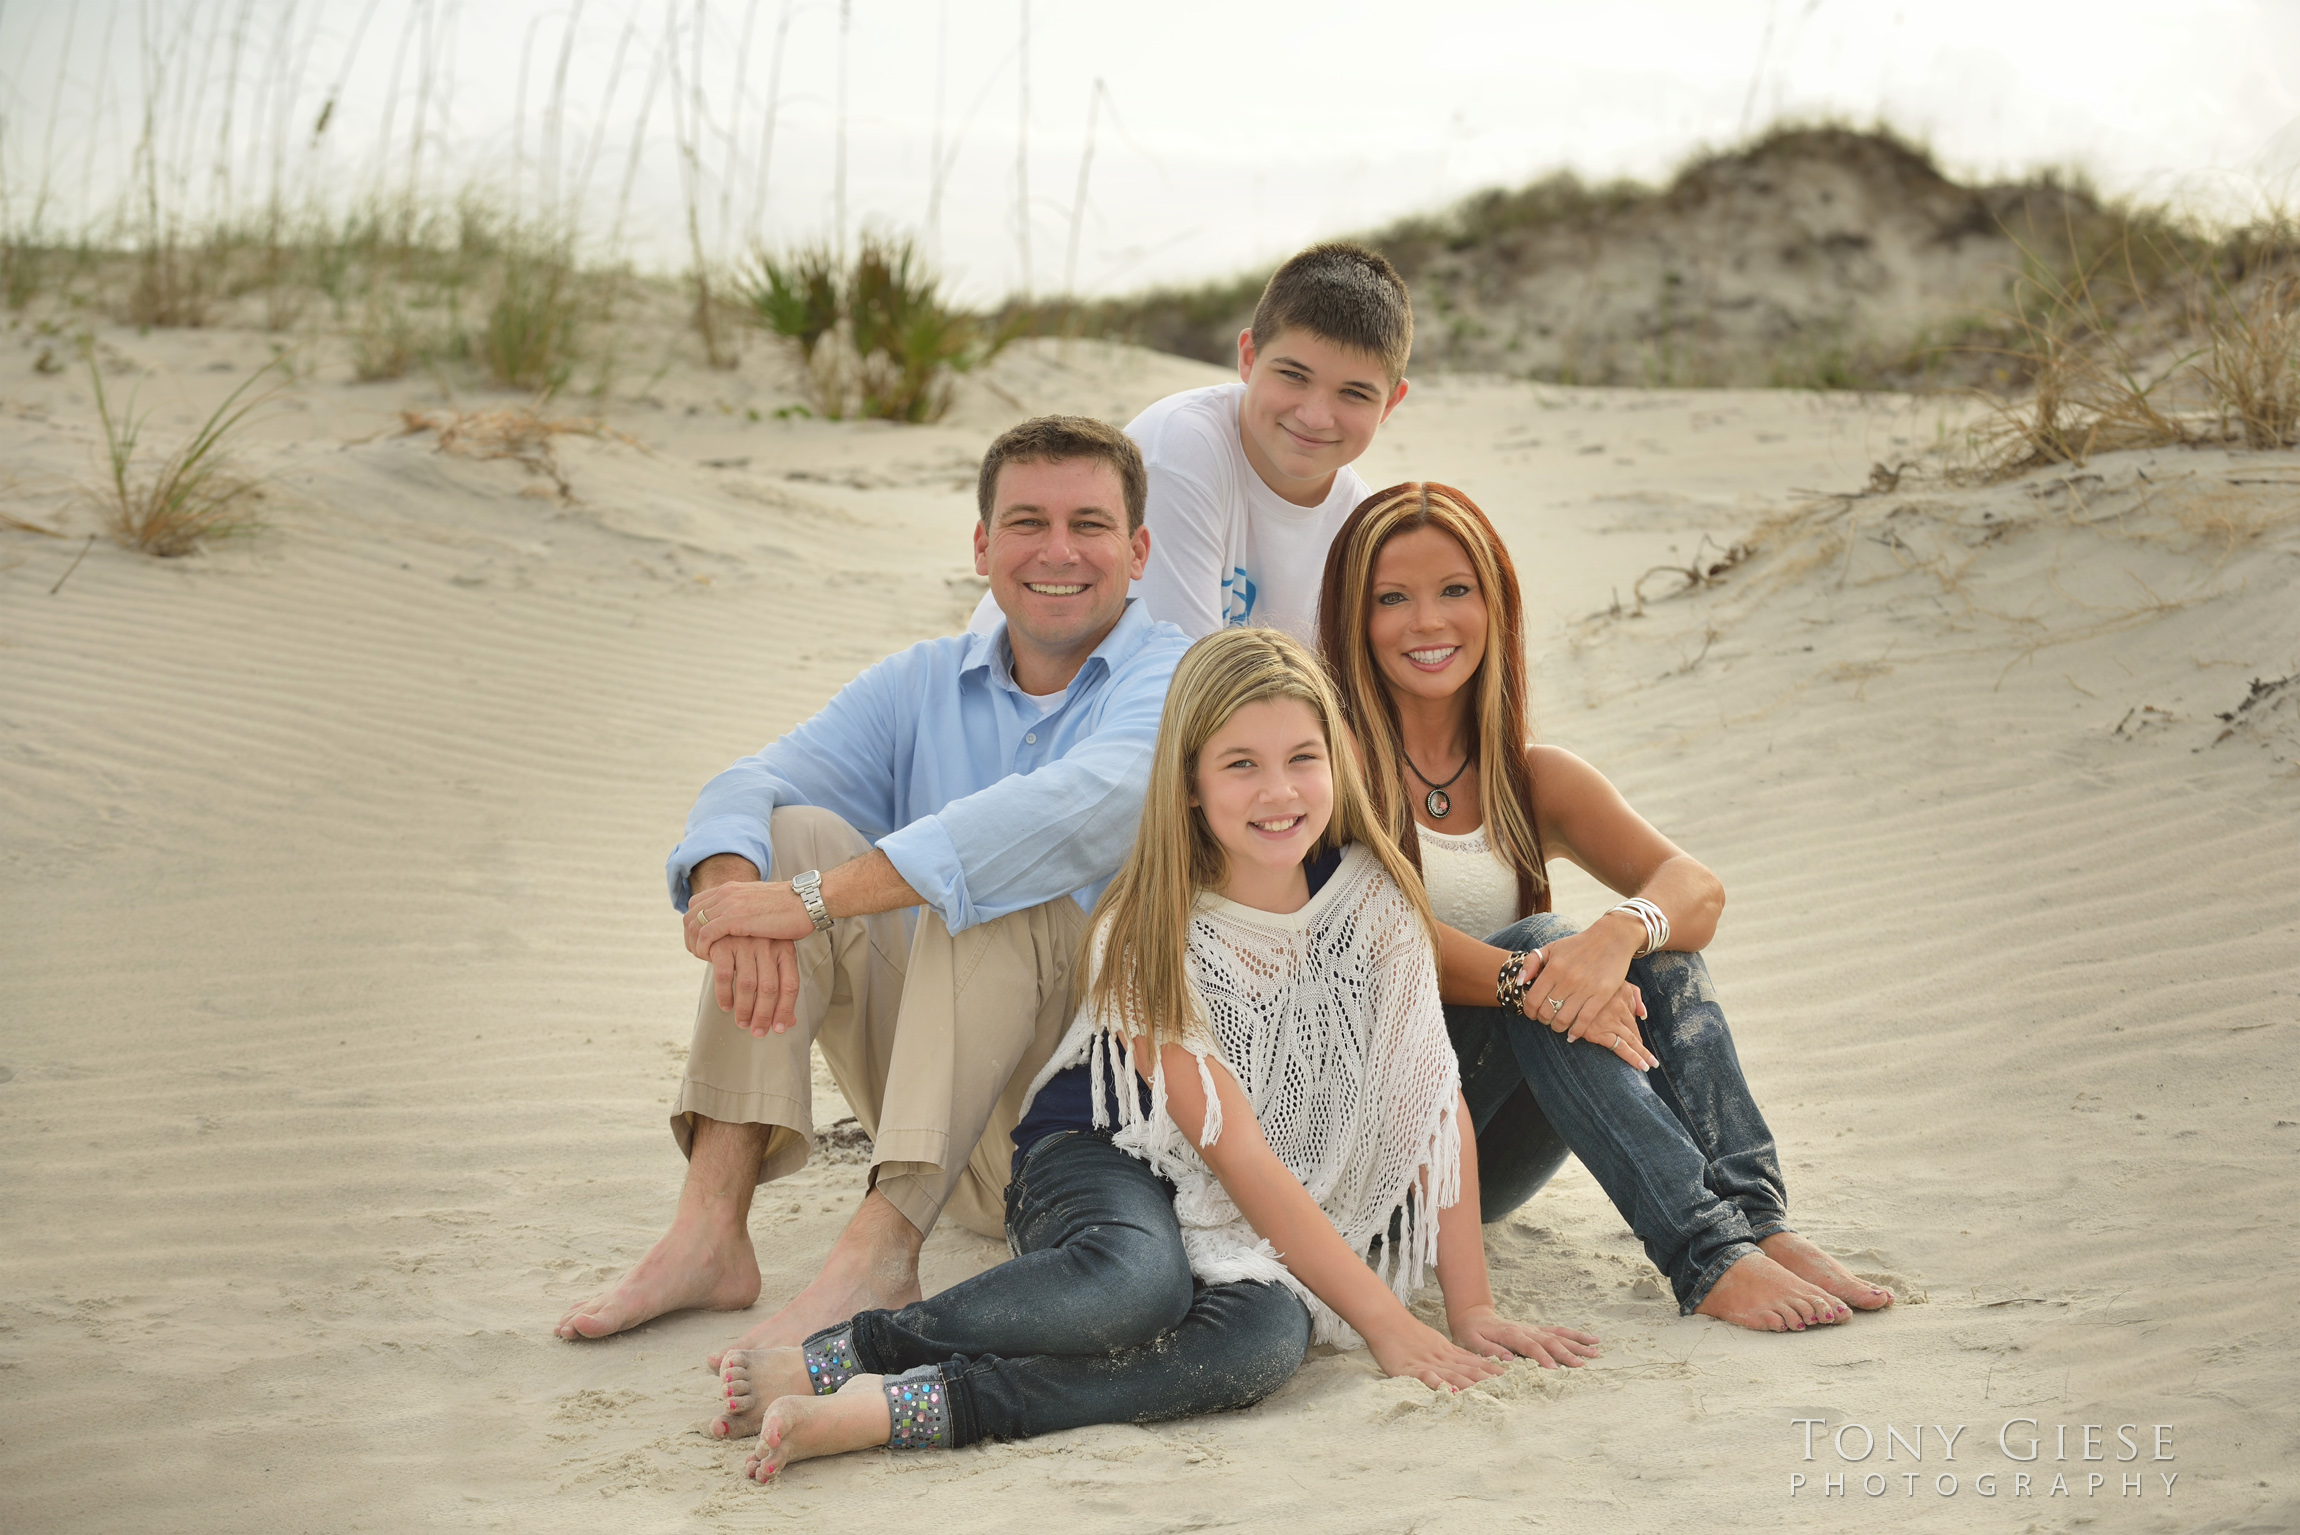 Family beach portraits by Tony Giese Photography